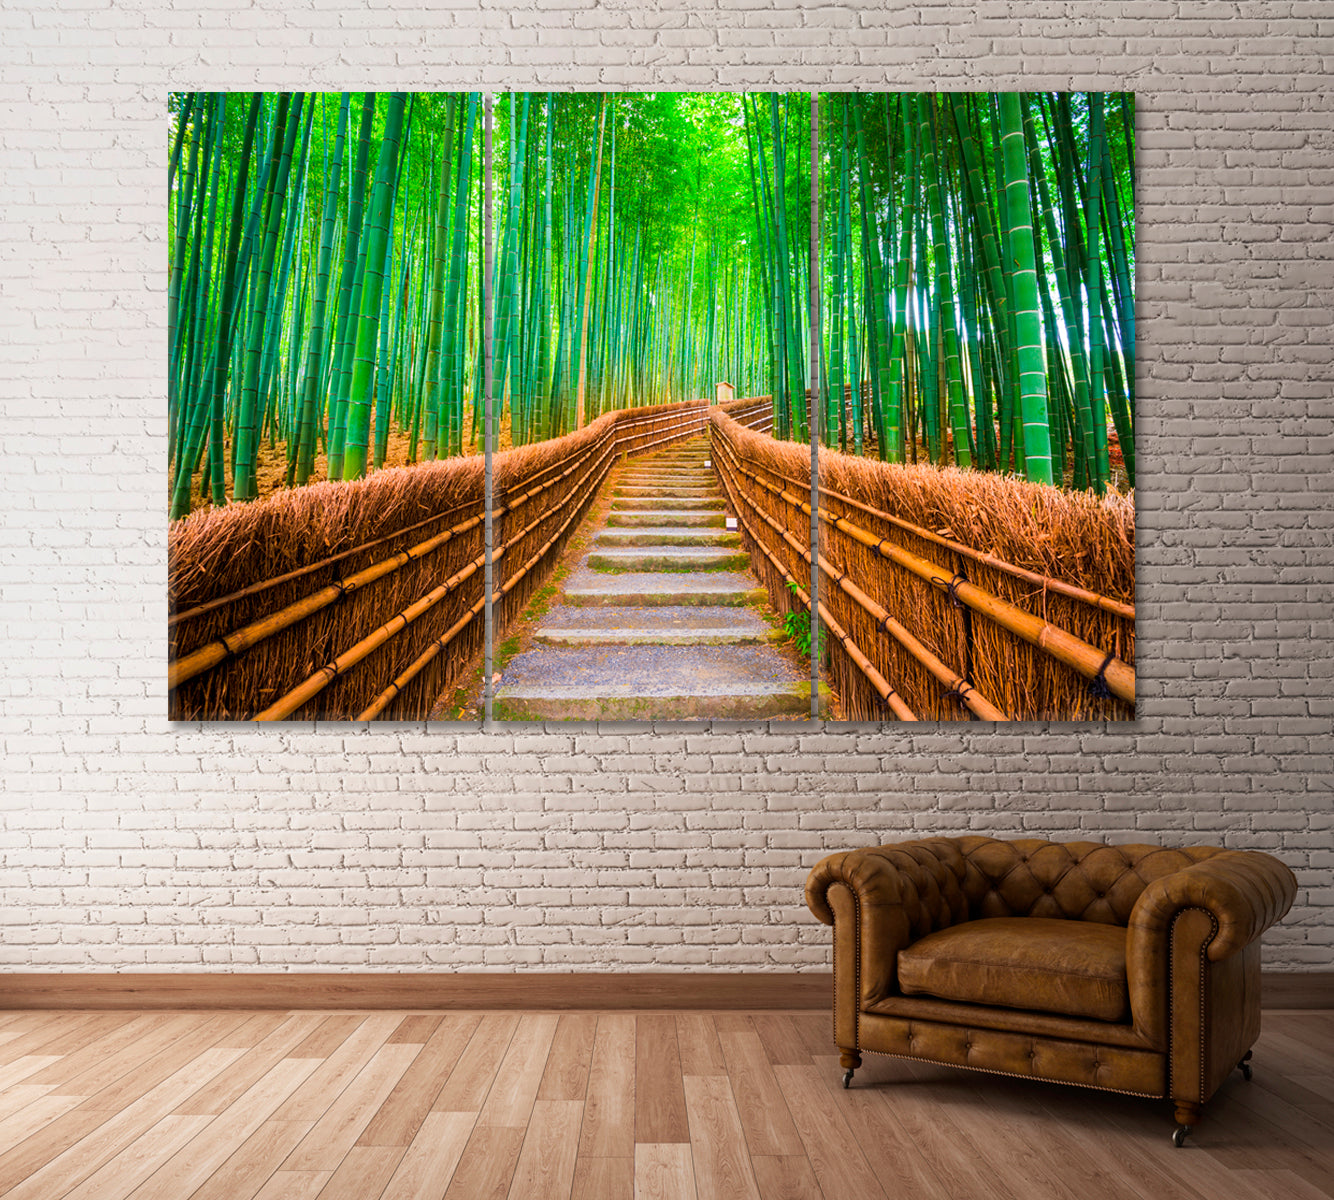 Bamboo Forest Kyoto Japan Canvas Print ArtLexy 3 Panels 36"x24" inches 